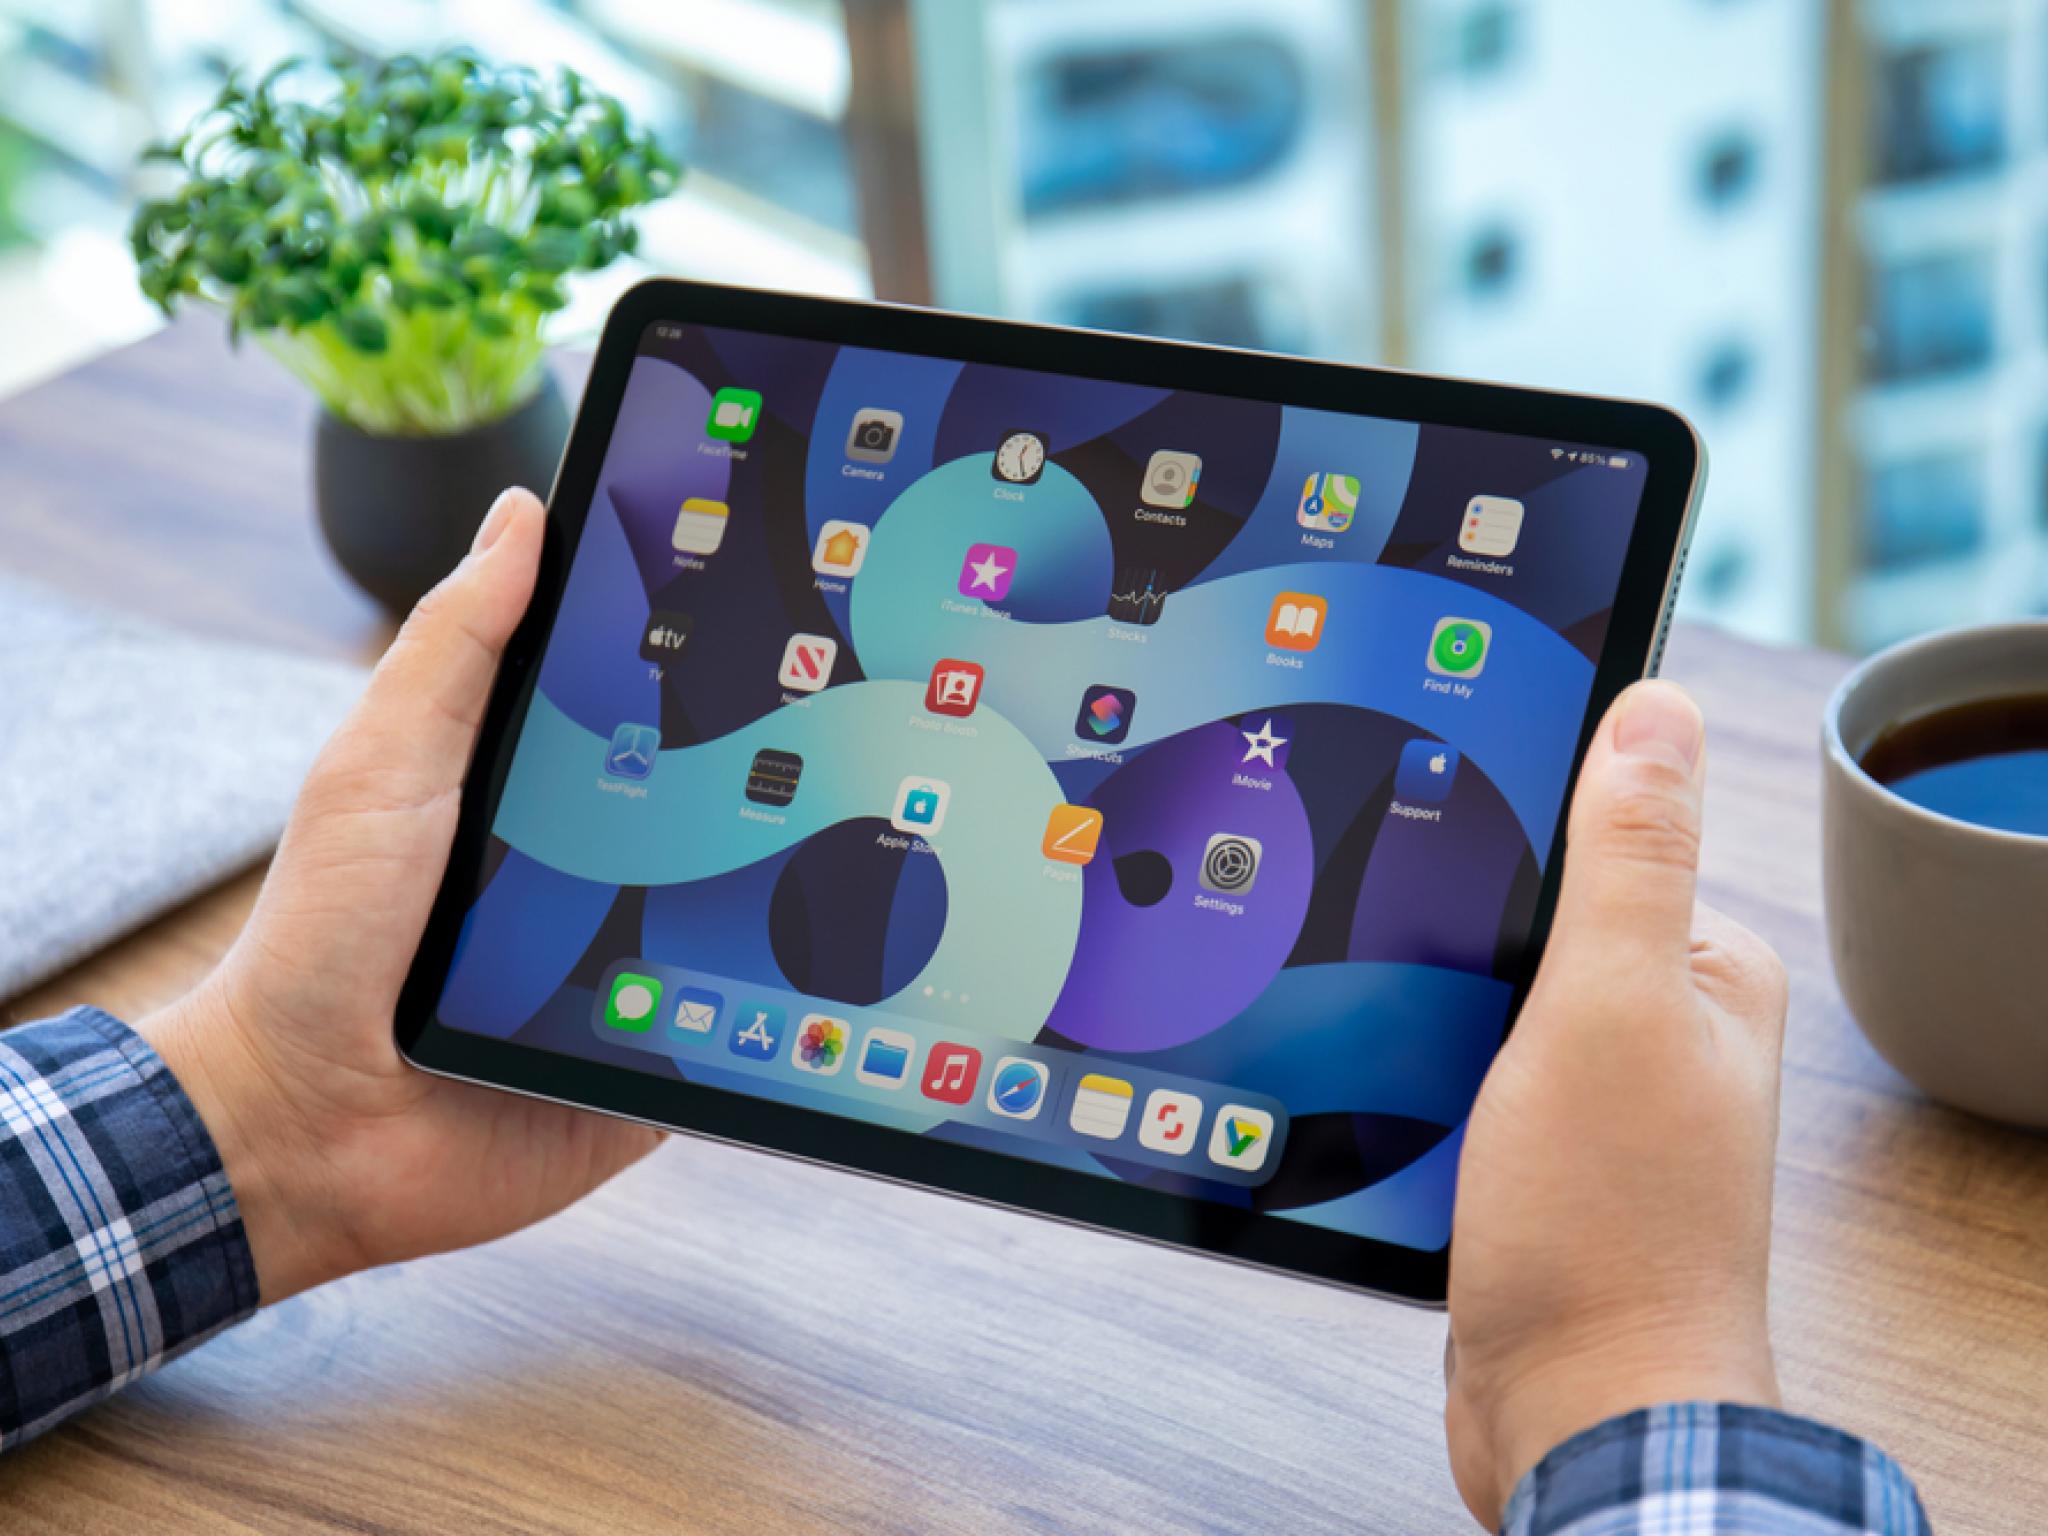  apple-should-turn-this-device-into-laptop-replacement-says-mark-gurman-the-days-of-purposely-holding-back-the-ipad-need-to-end 